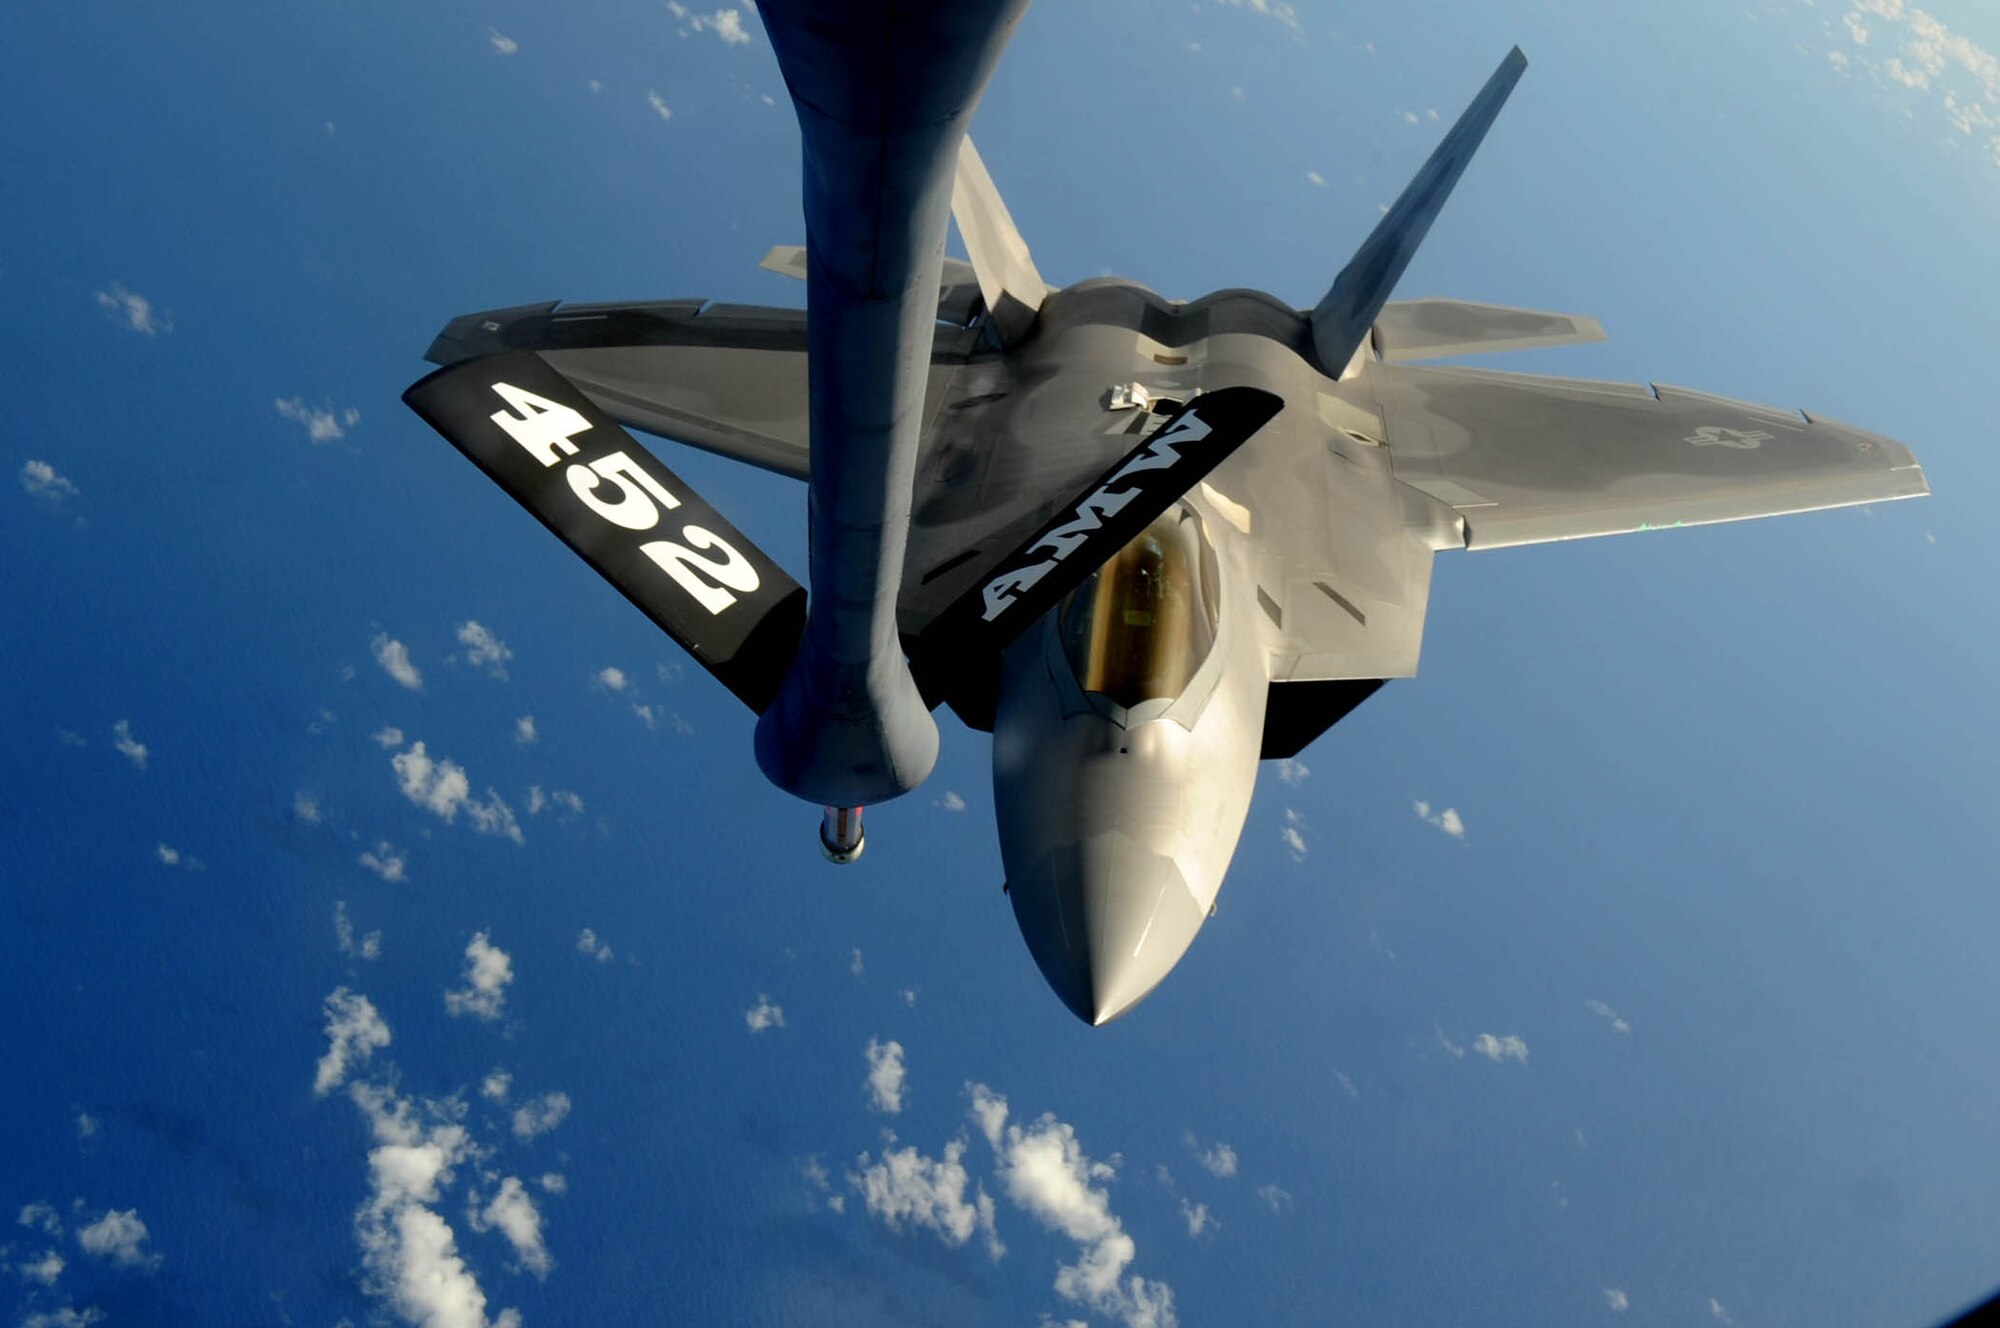 ANDERSEN AIR FORCE BASE, Guam -- An F-22 Raptor approaches the boom of a KC-135 Stratotanker to refuel over the Pacific Ocean Aug. 13. KC-135 Stratotankers, F-22 Raptors and B-52 Stratofortress bombers took part in the 2009 Inaugural Turkey Shoot, which allows air expeditionary units to plan and execute tactical missions with airframes that don't regularly train together. The F-22s are deployed from Elmendorf Air Force Base, Alaska, to Andersen AFB to support U.S. Pacific Command's Theater Security Package in the Asia-Pacific region. (U.S. Air Force photo/Senior Airman Christopher Bush)